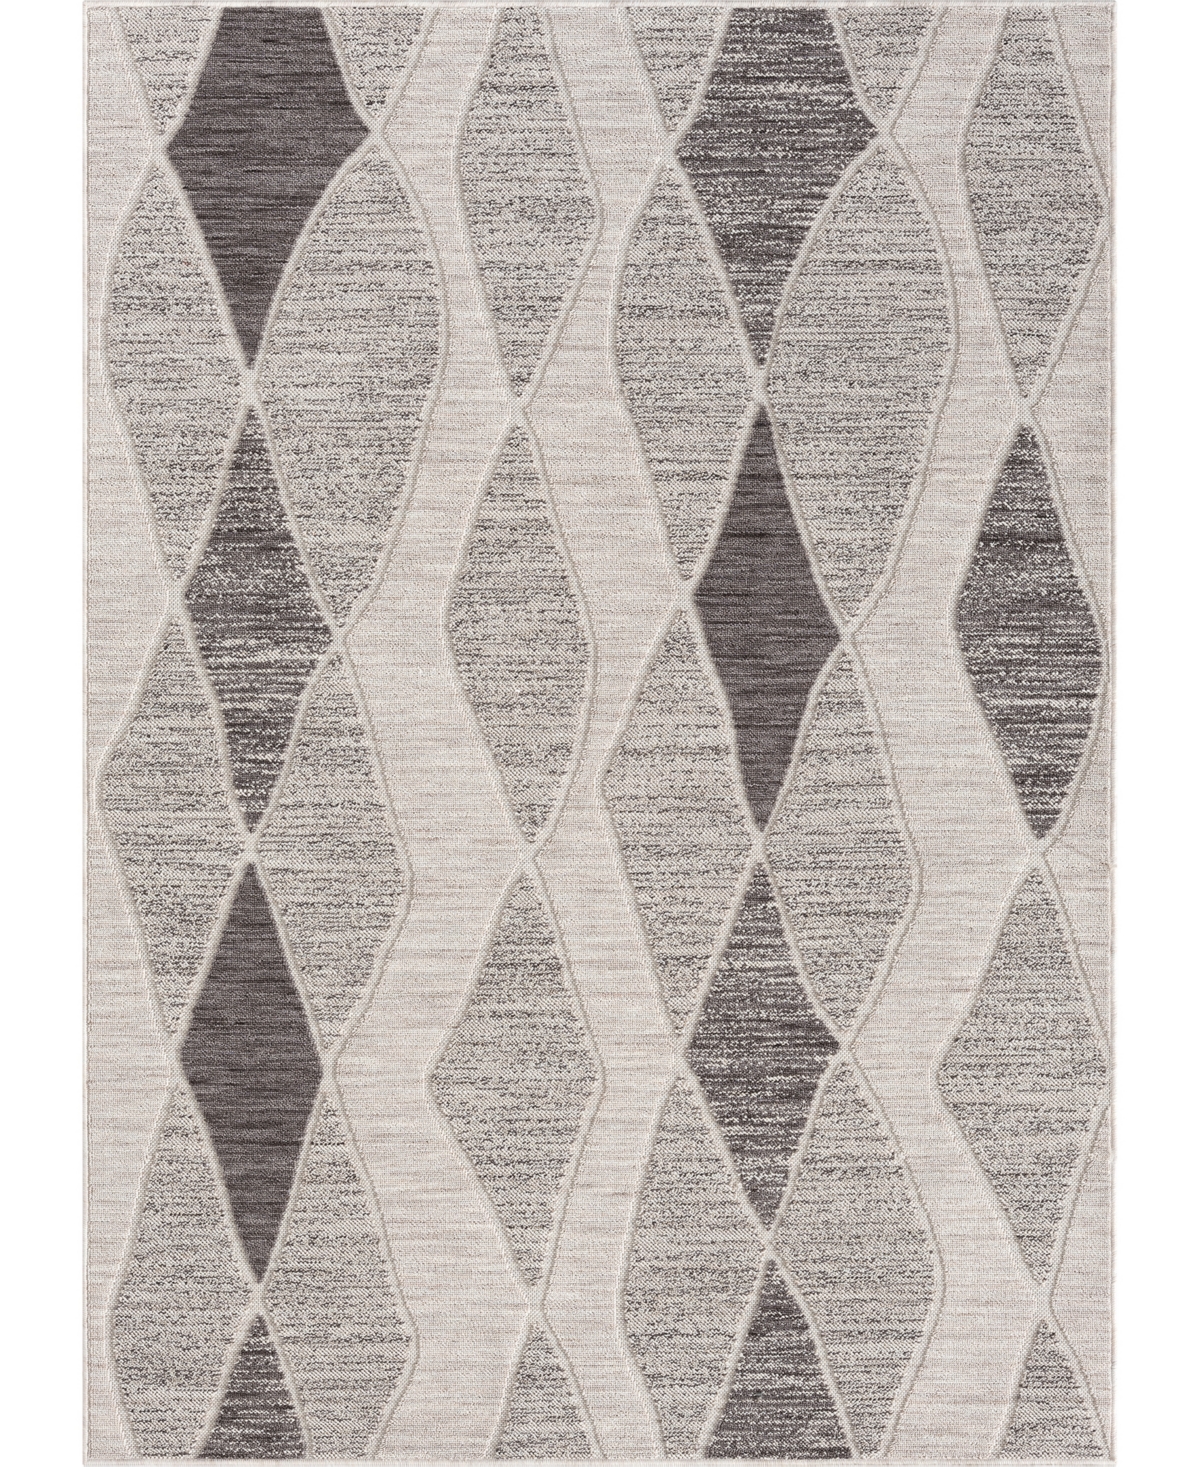 Lr Home Wagner Wagnr82295 5' X 7' Outdoor Area Rug In Gray